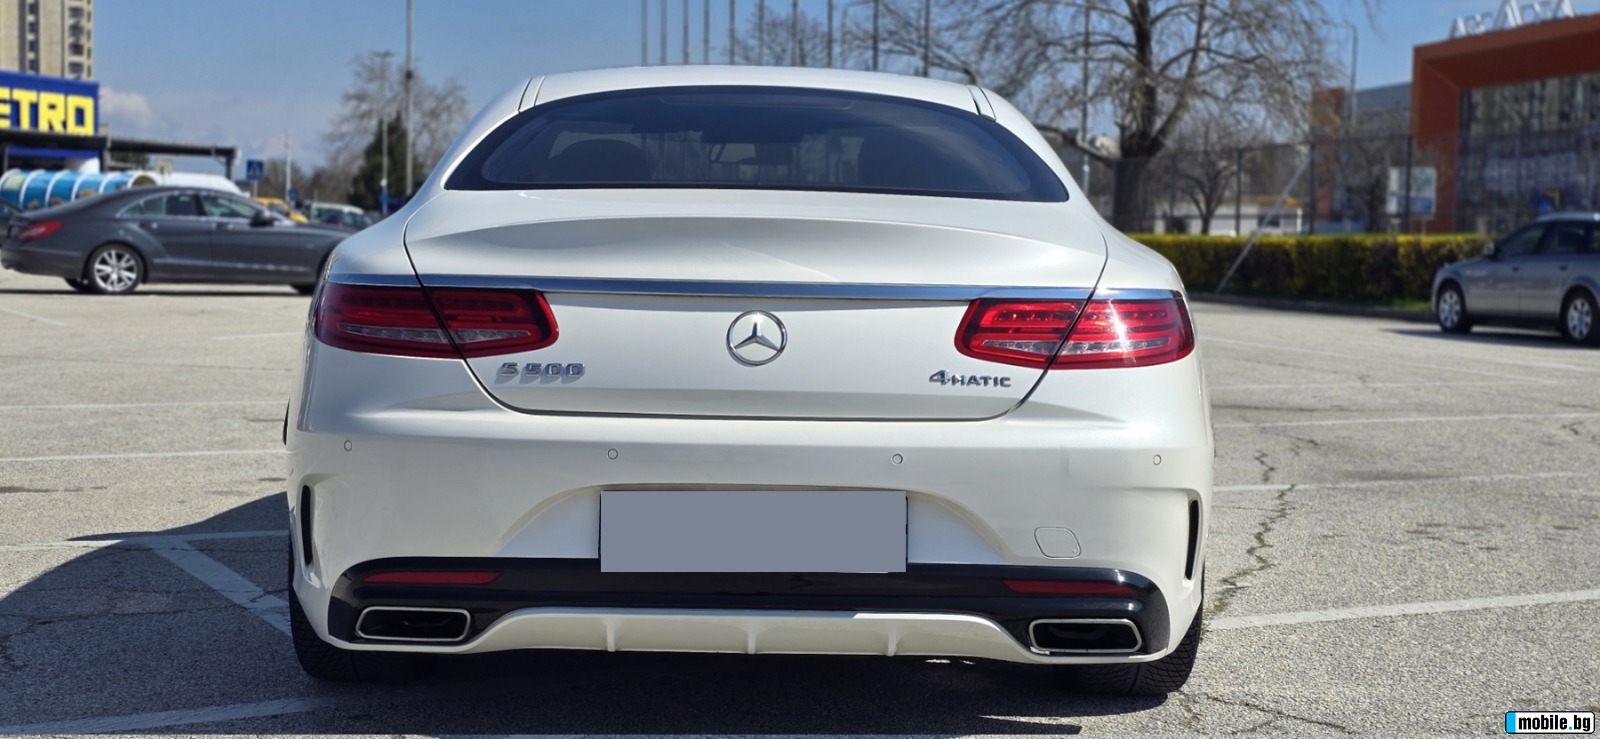 Mercedes-Benz S 500 AMG-4Matic-360-Distronic-HUD-Panorama | Mobile.bg   6